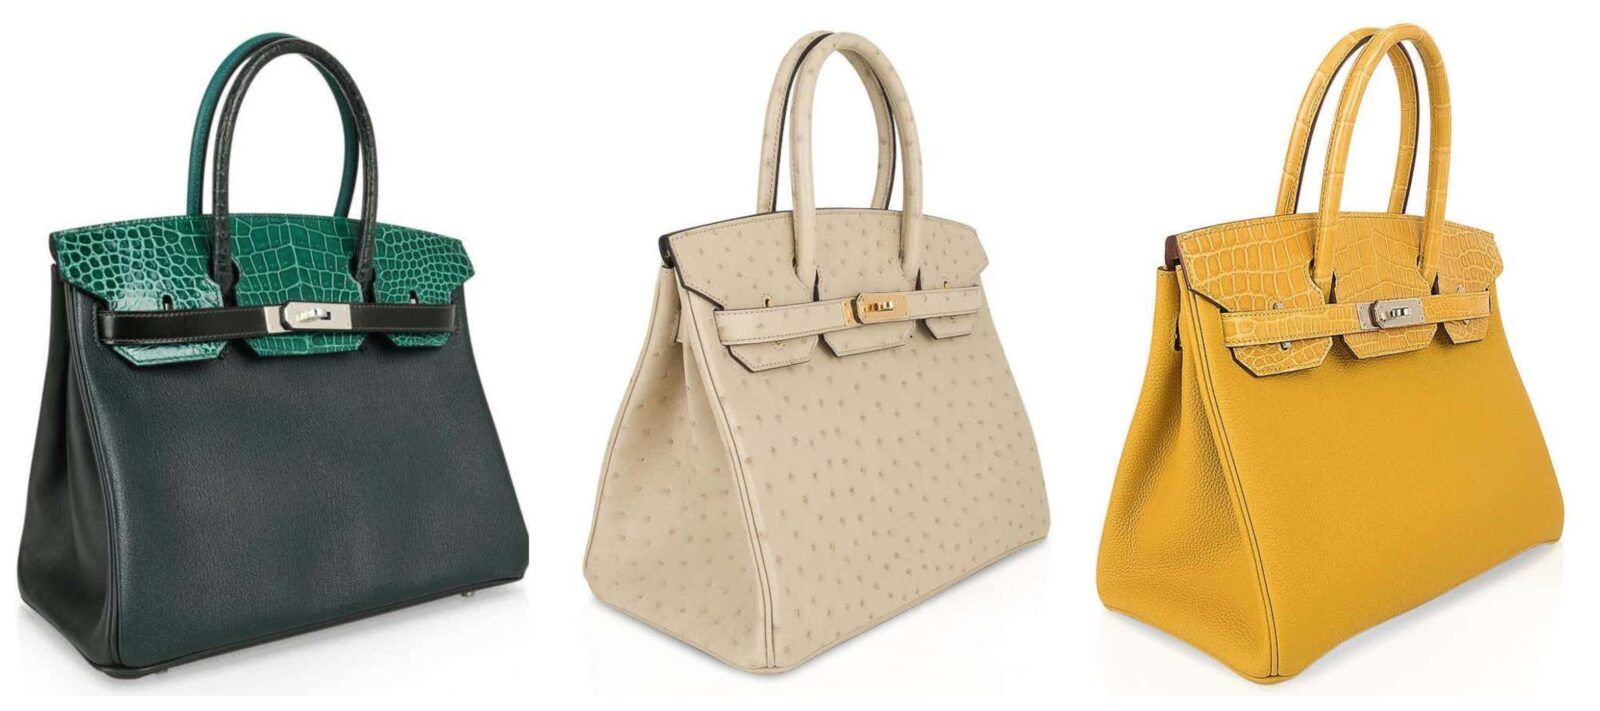 Why the Hermès Birkin Bag Is a Surprisingly Savvy Investment - The Study